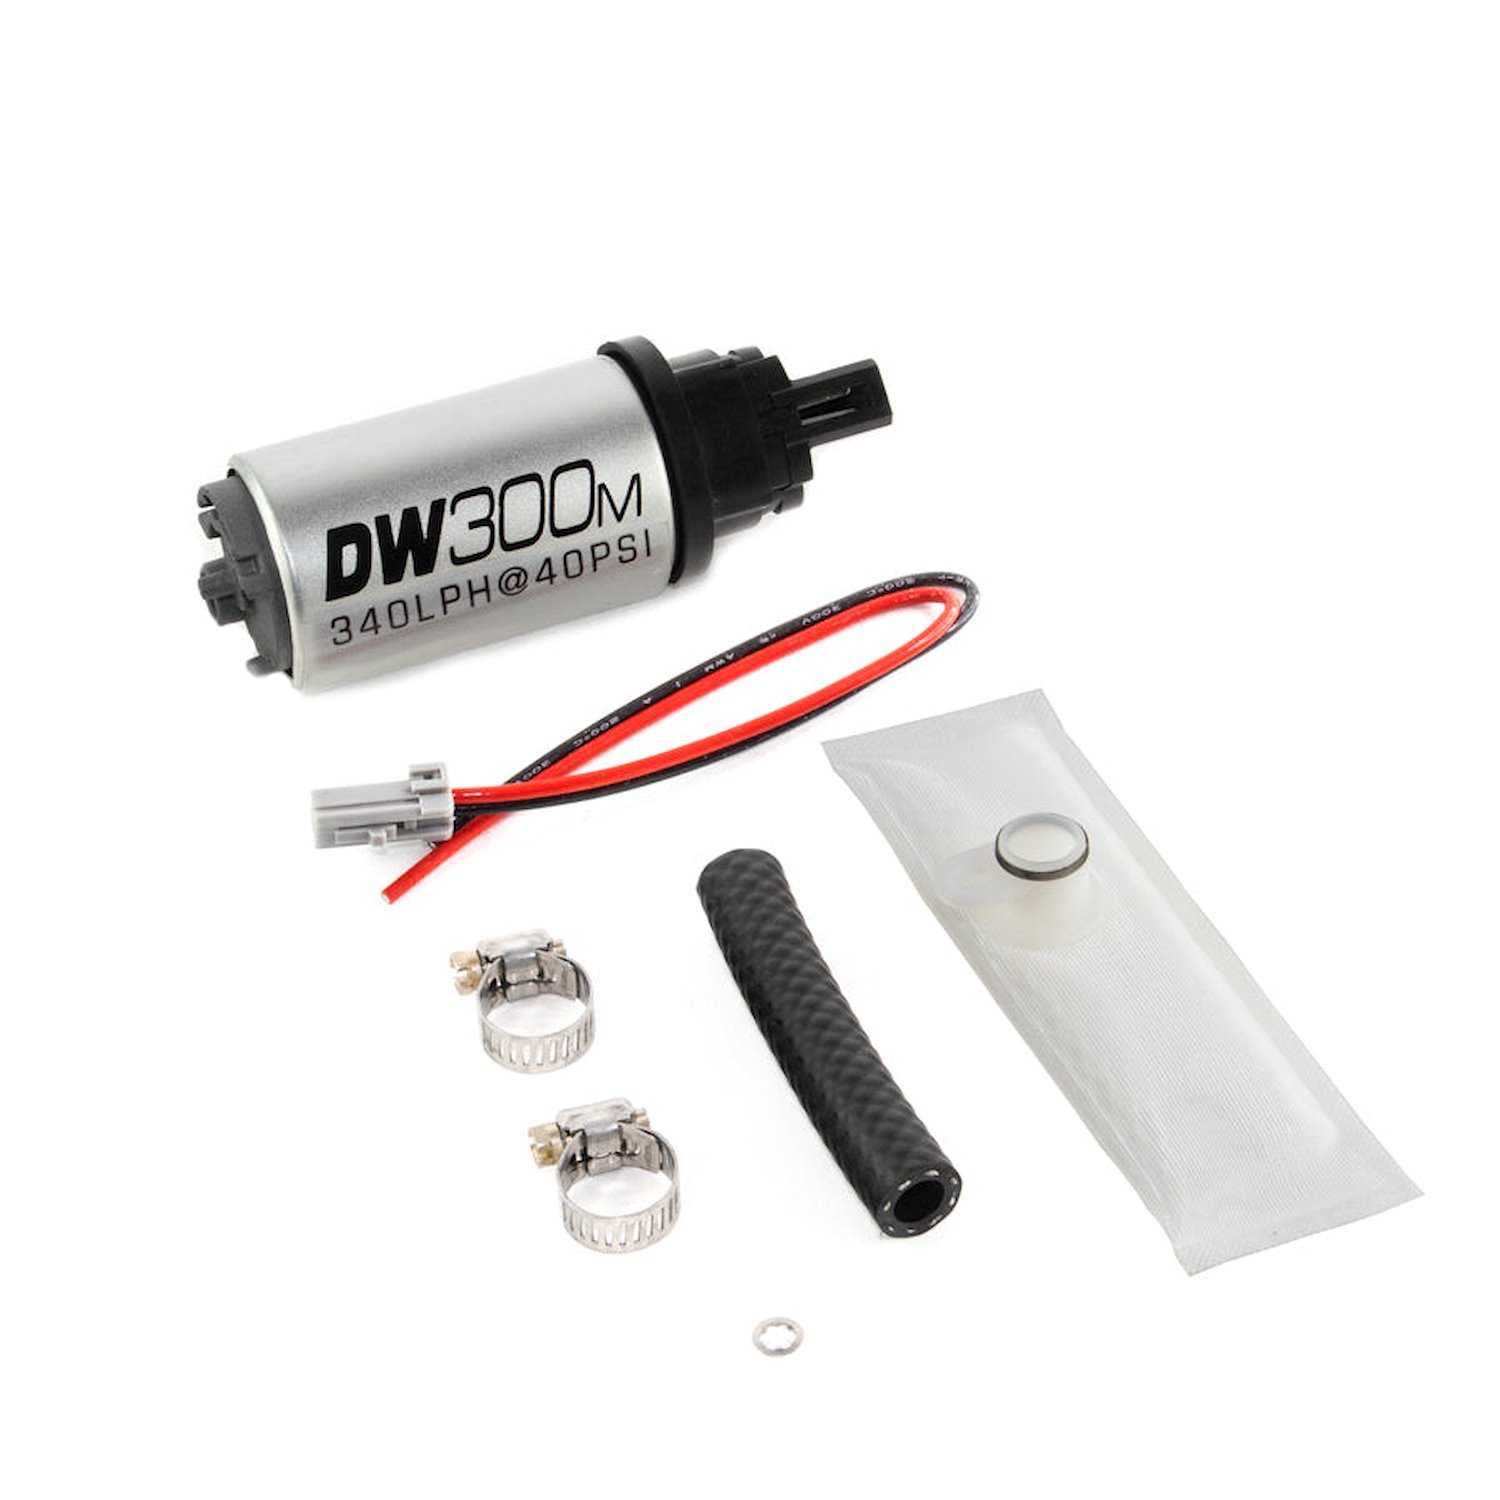 93051037 DW300M series 340lph Ford in-tank fuel pump and install kit for 97-04 F150/250 V6/V8 (gas only)